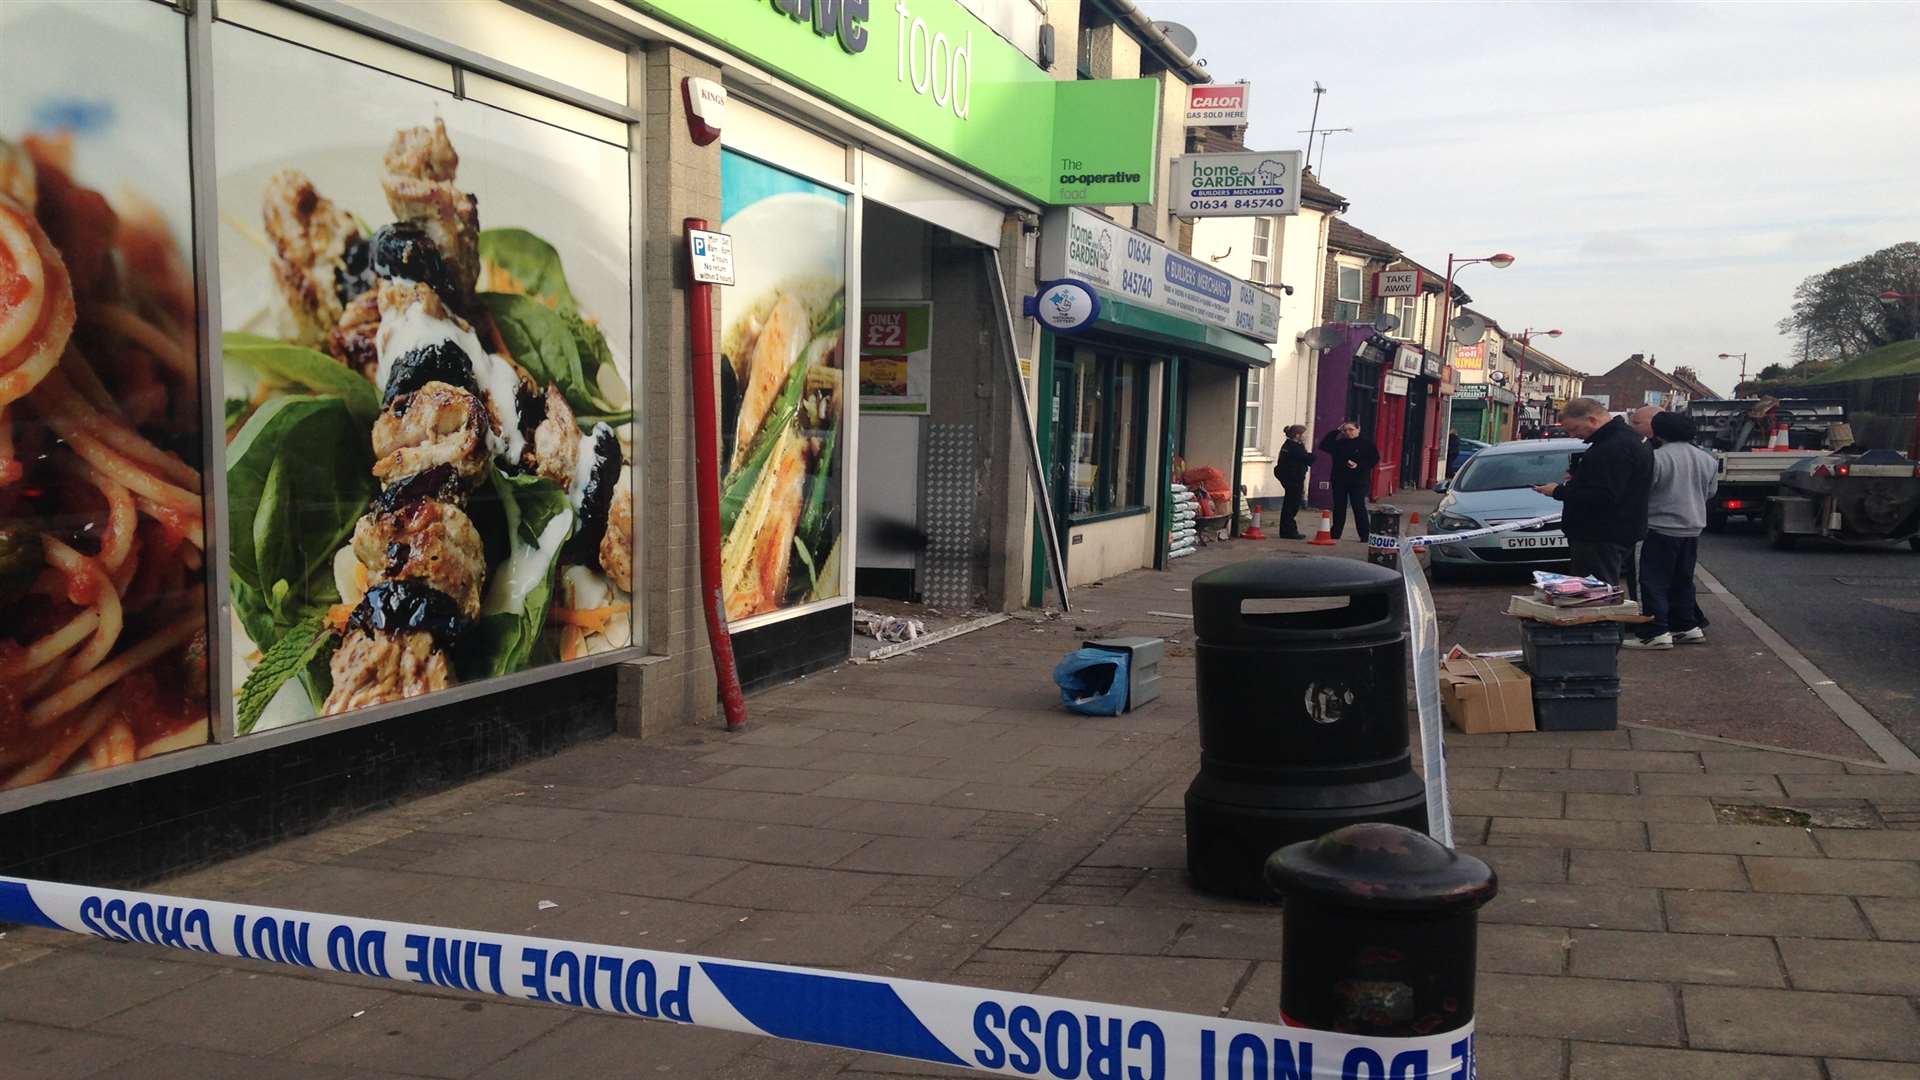 A cordon has been placed around the crime scene